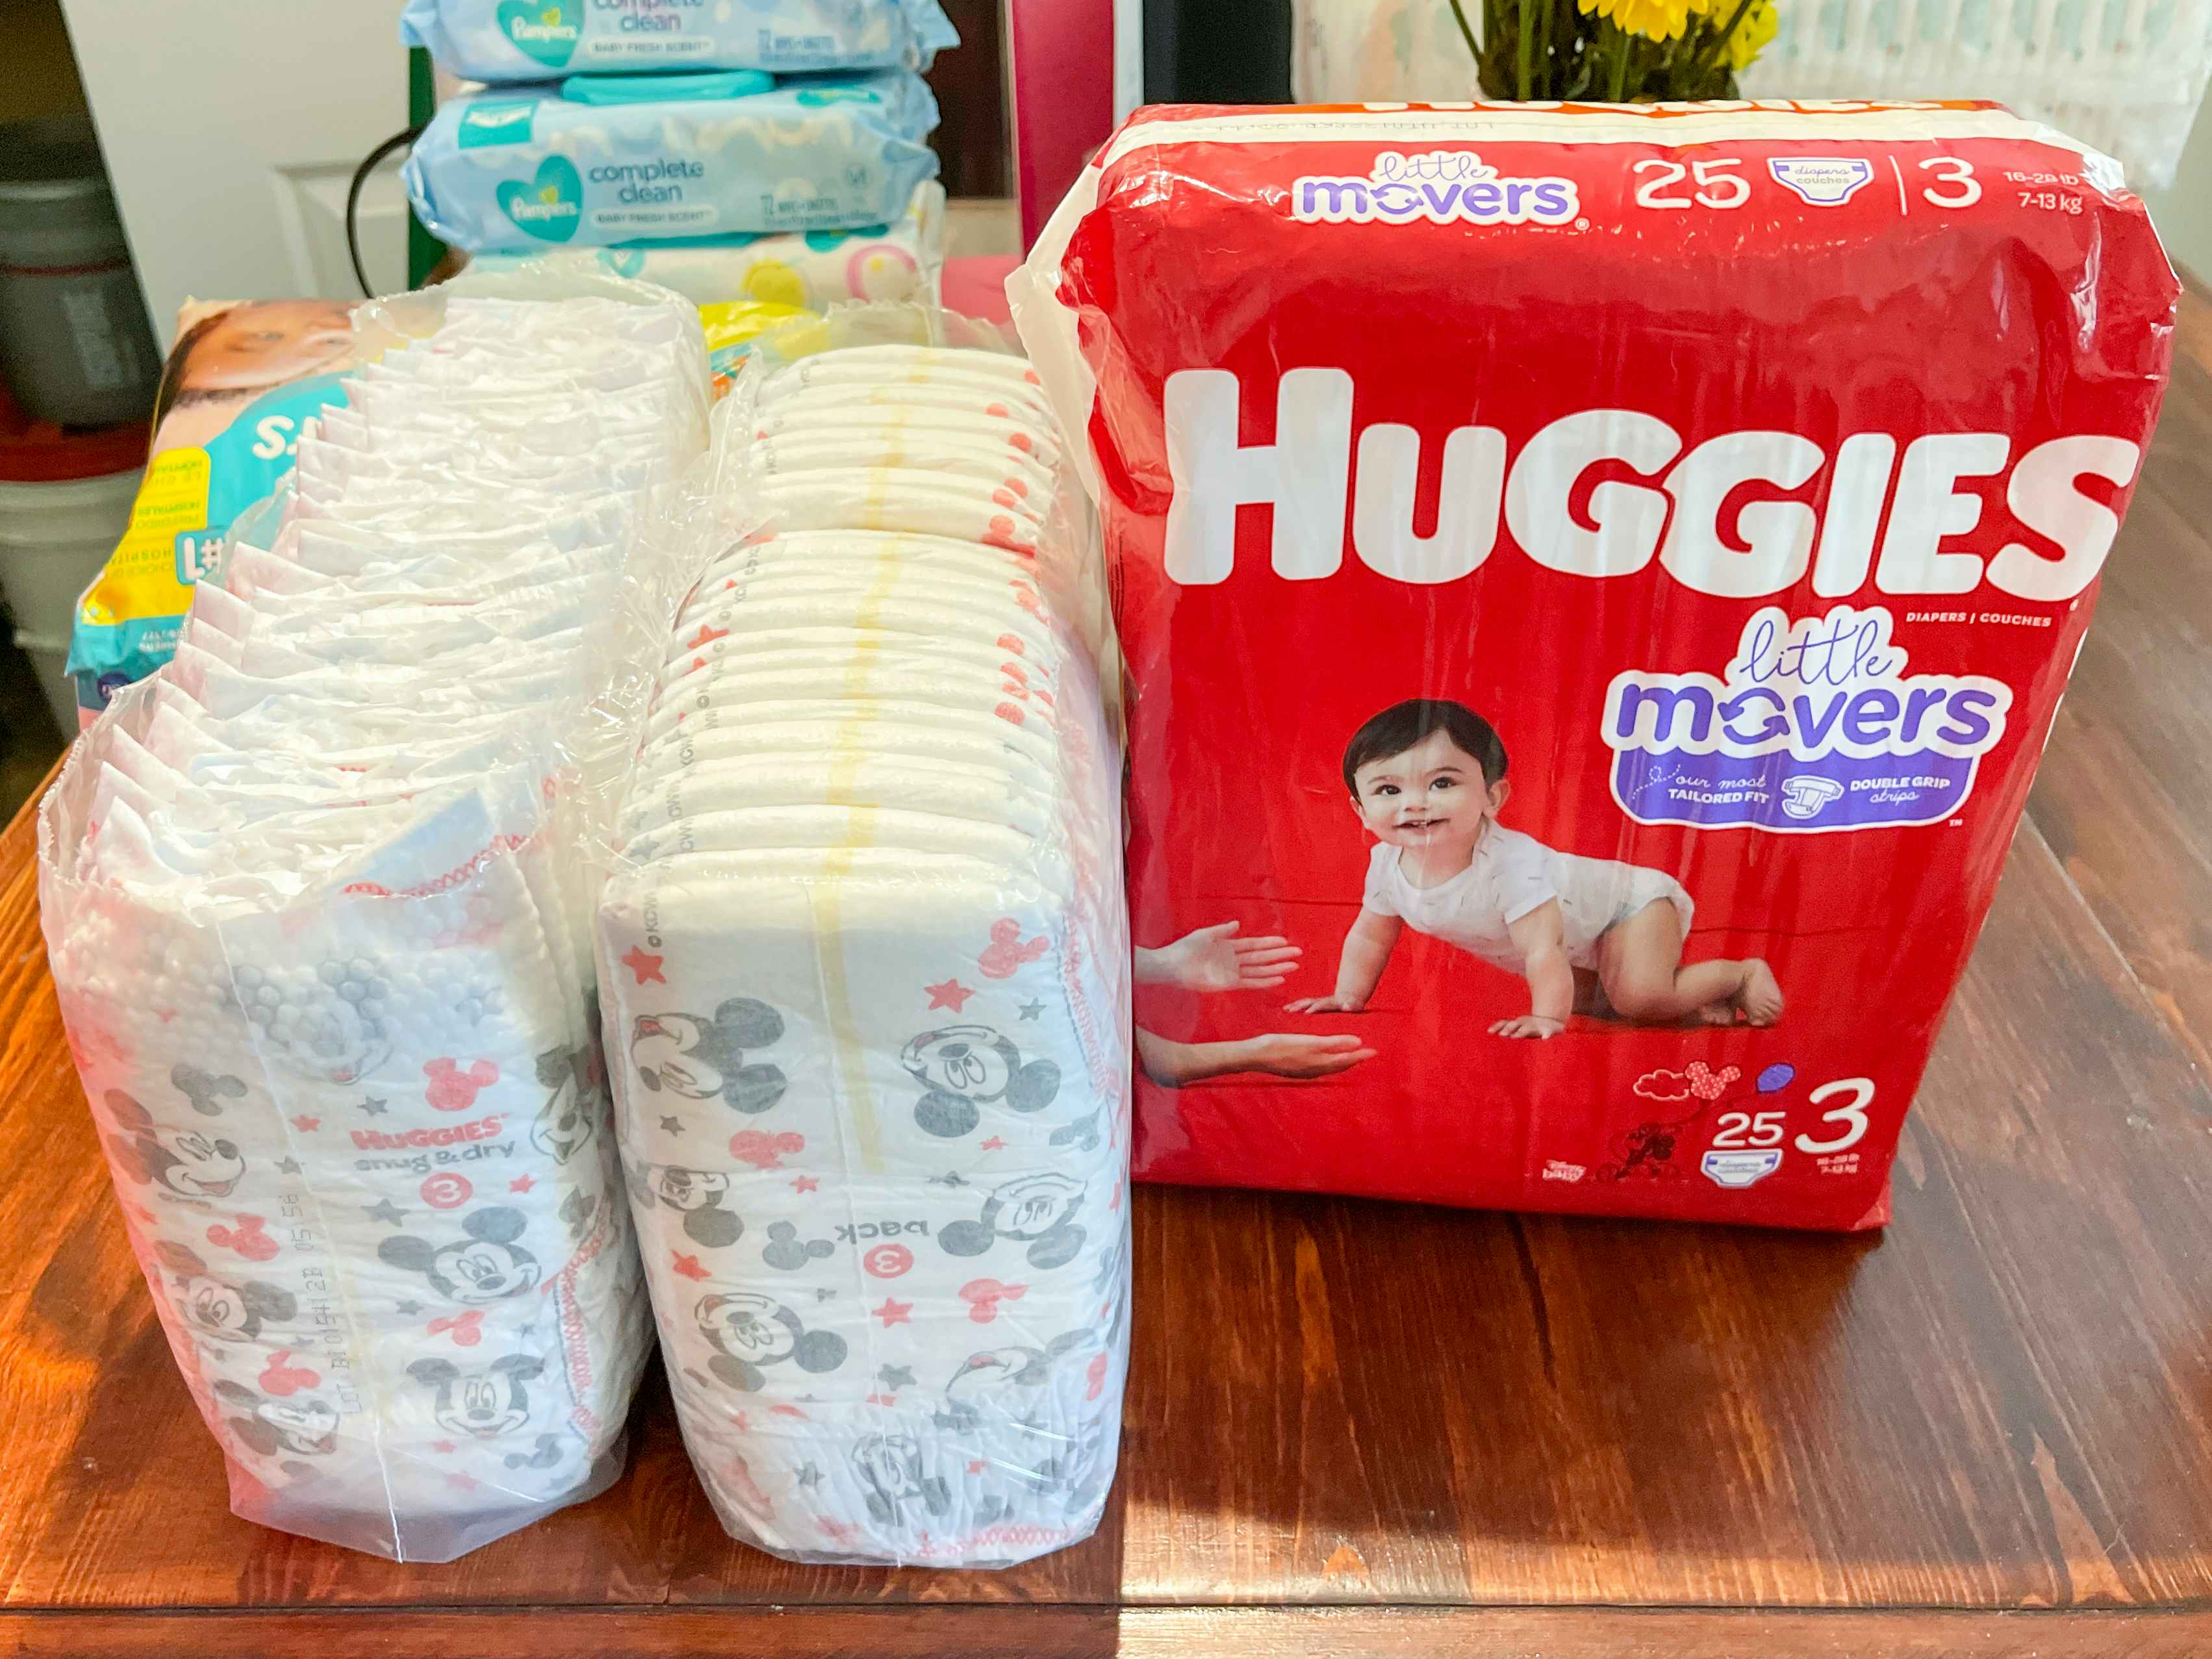 Huggies and pampers diapers, some packs open sitting on a kitchen table